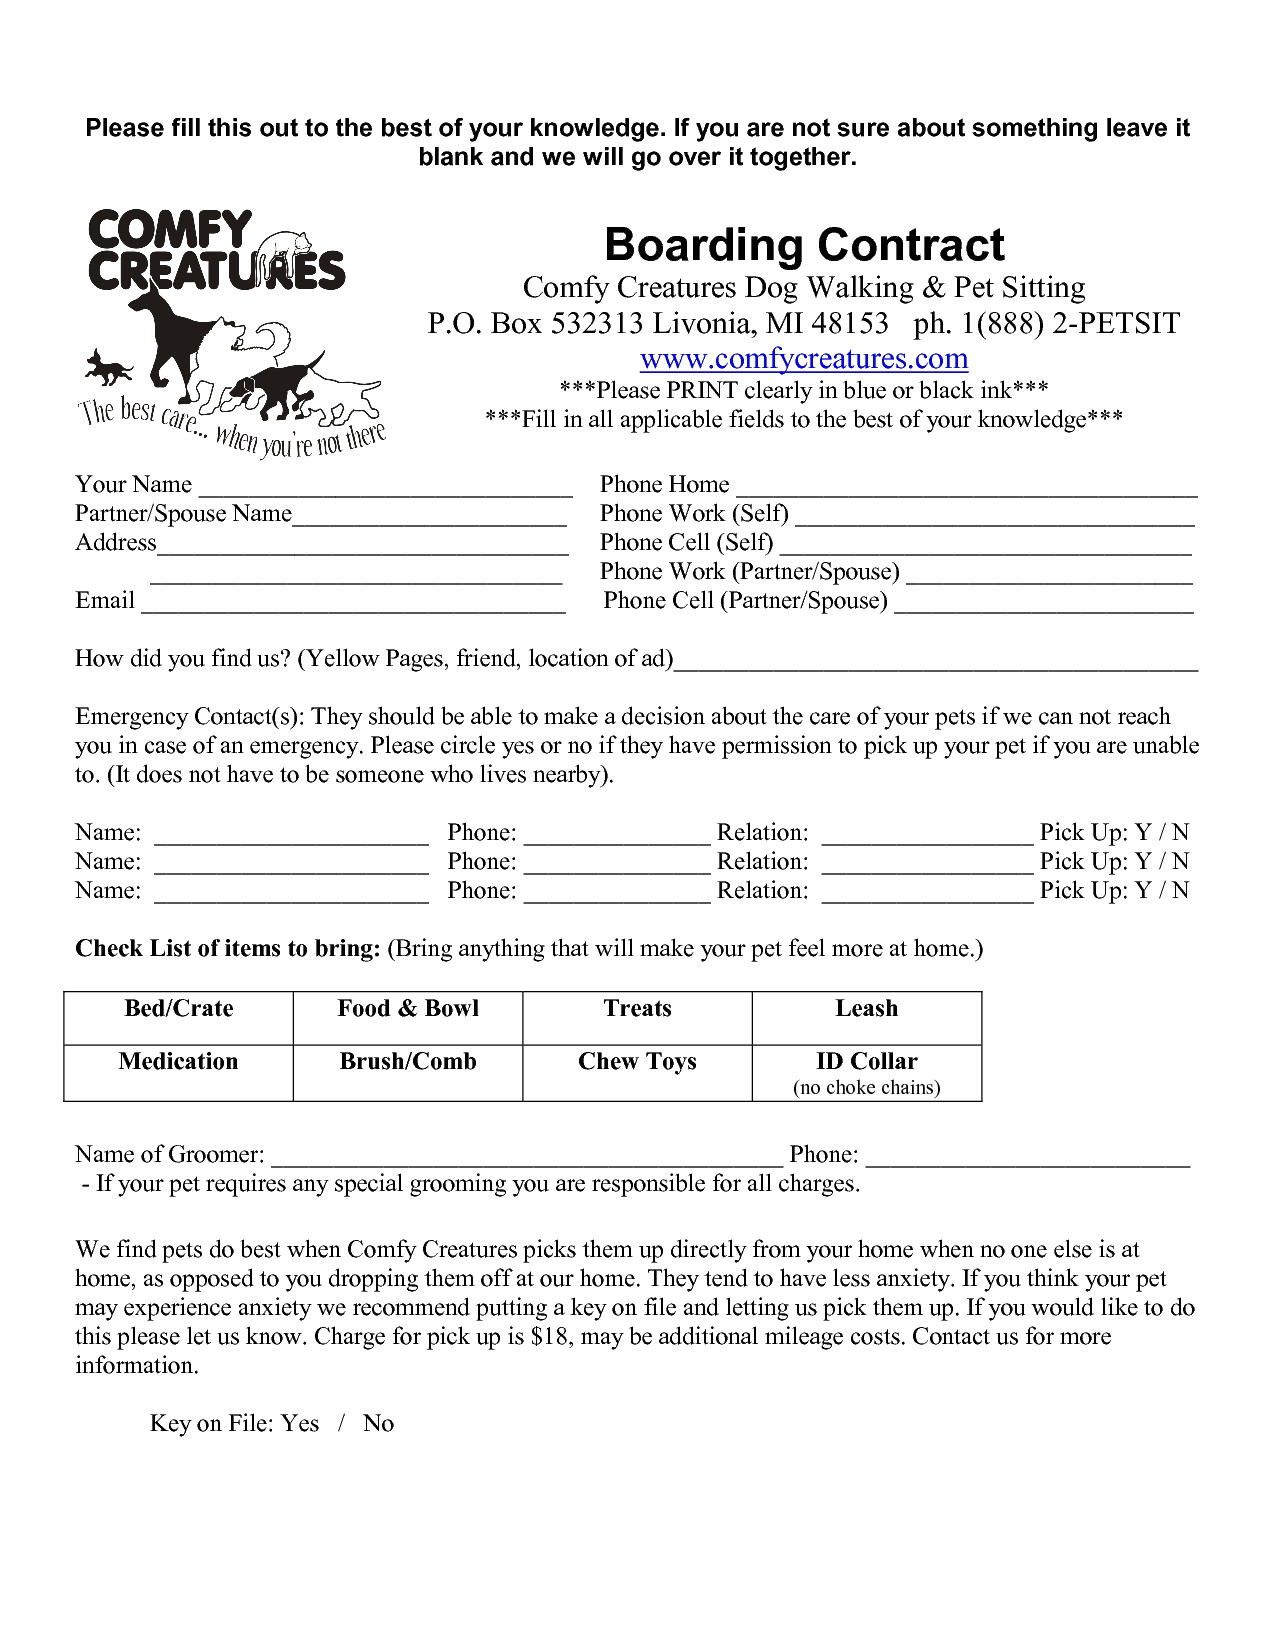 pet sitting agreement contract excellent 8 best of free templates blank printable dog yo d41288